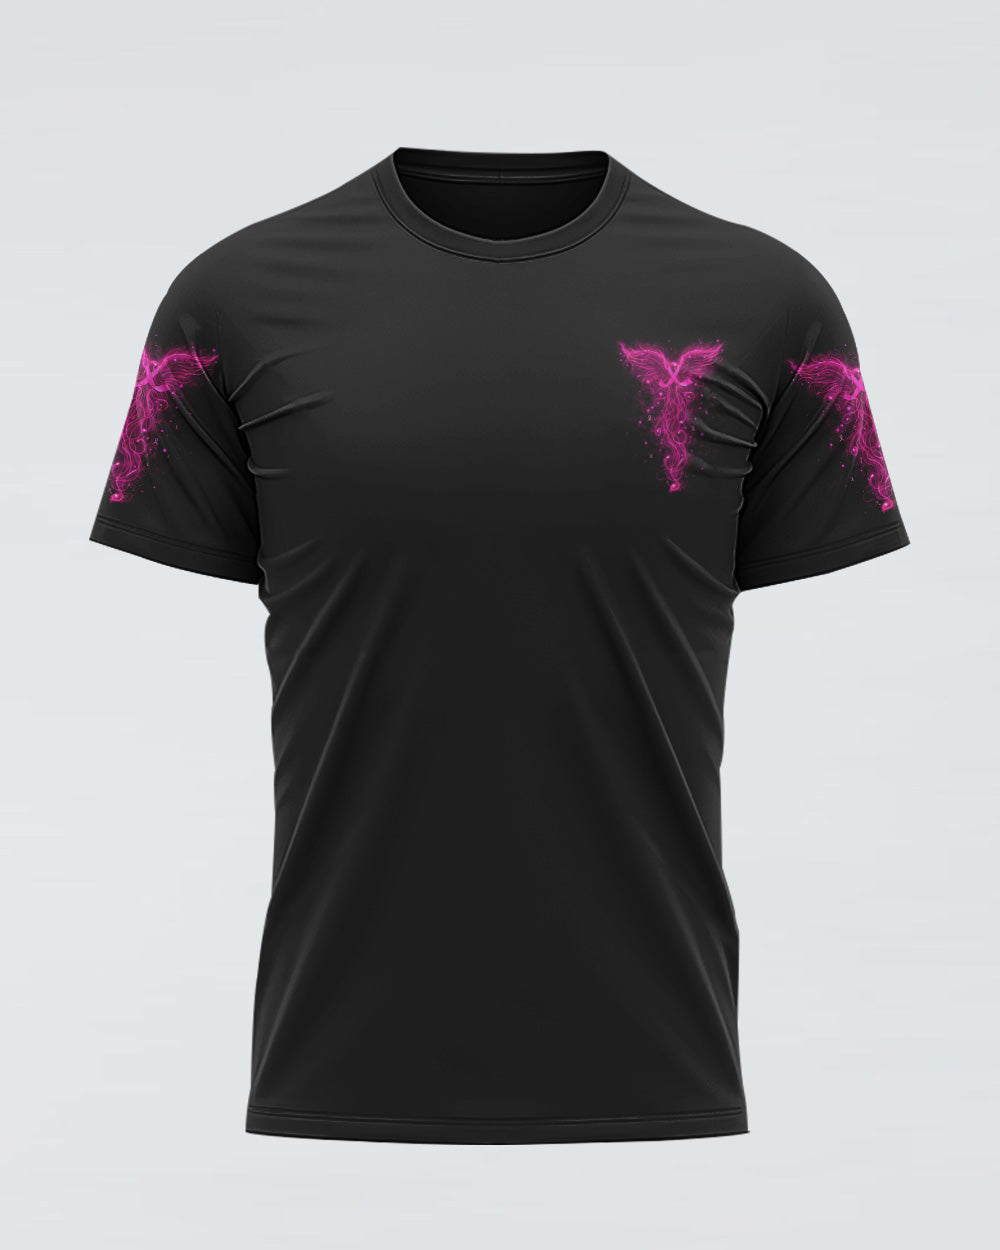 Never Give Up Phoenix Women's Breast Cancer Awareness Tshirt